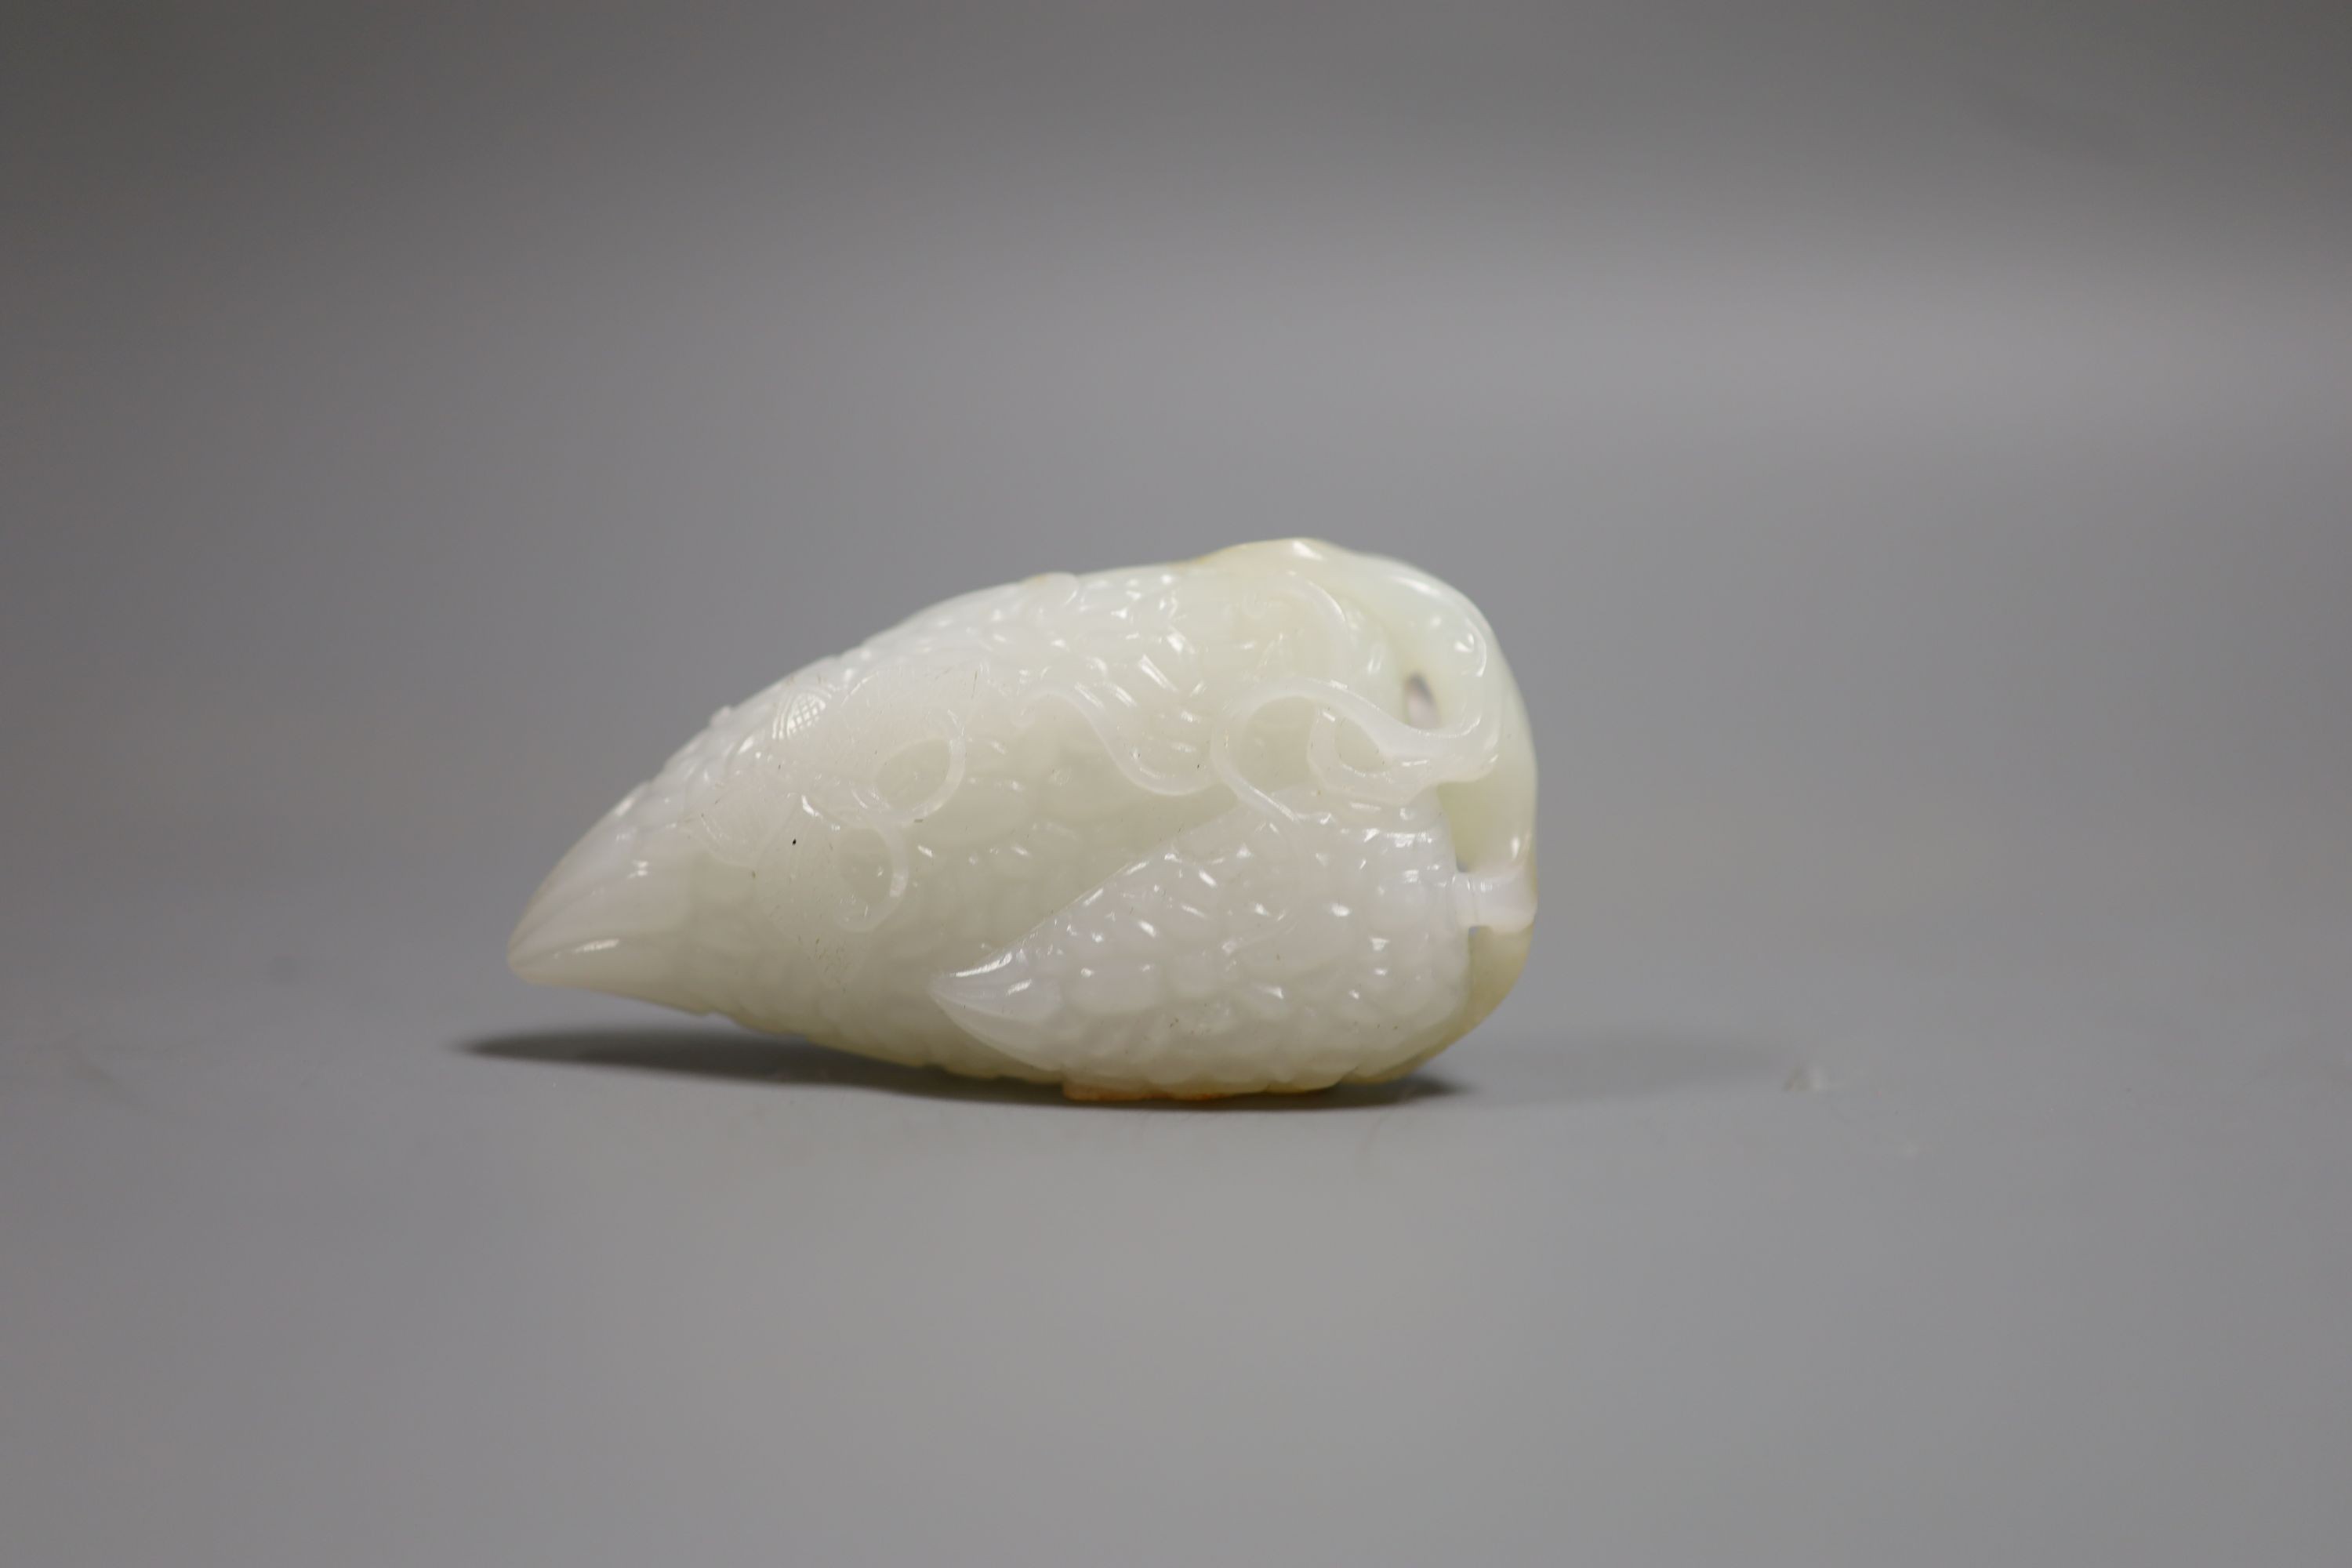 A Chinese white and russet skin jade carving, 7cm high - Image 2 of 2